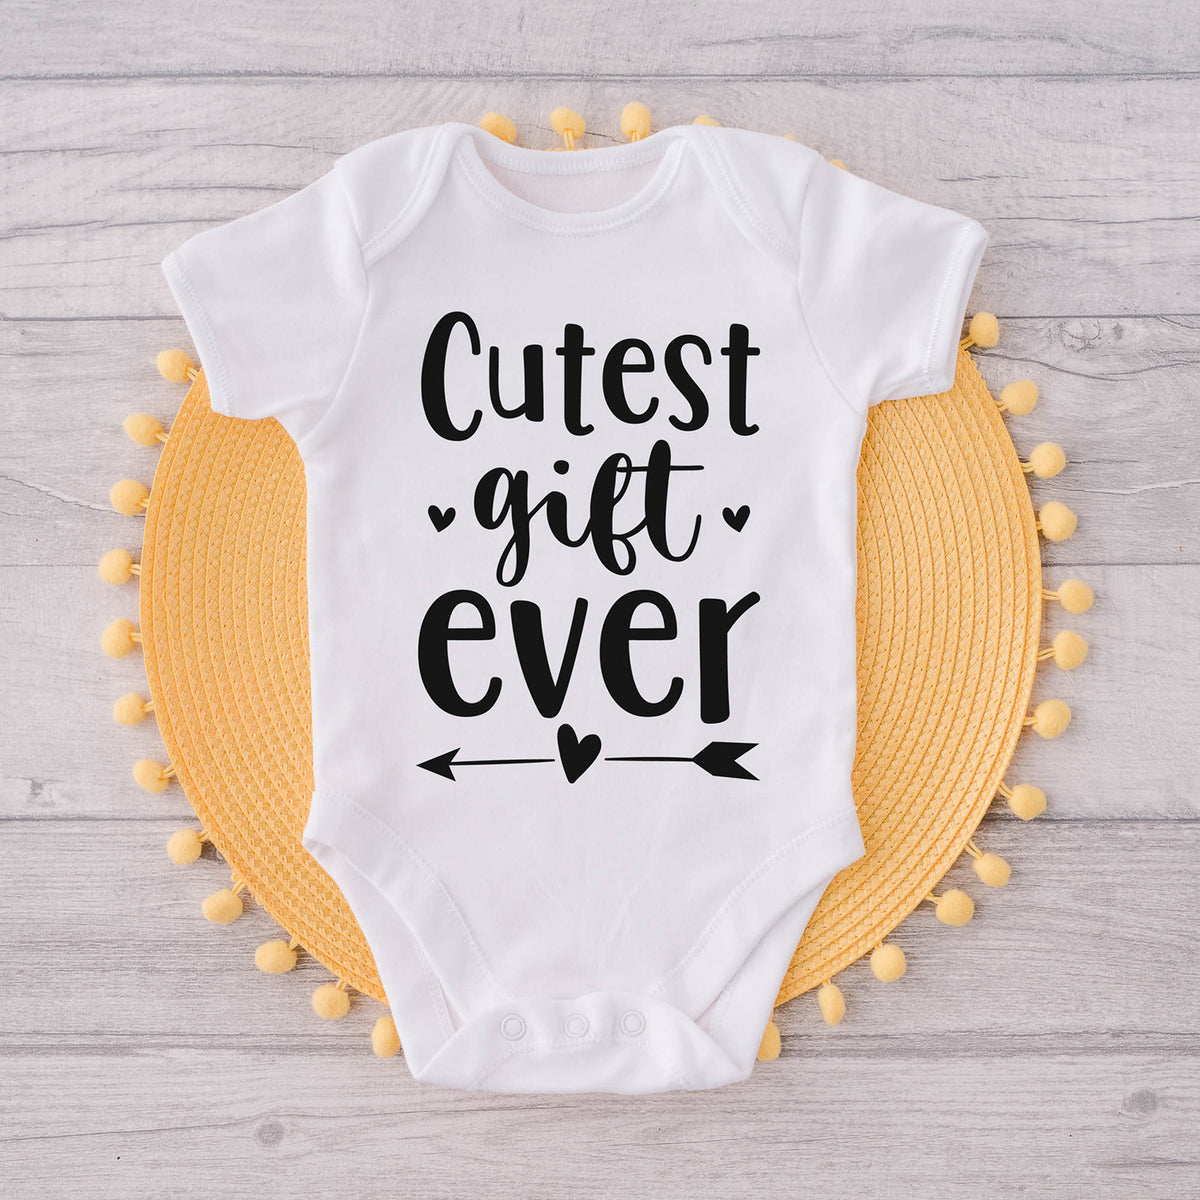 Best Baby Gifts | Gift Guides | Ashley Hodges - the blog